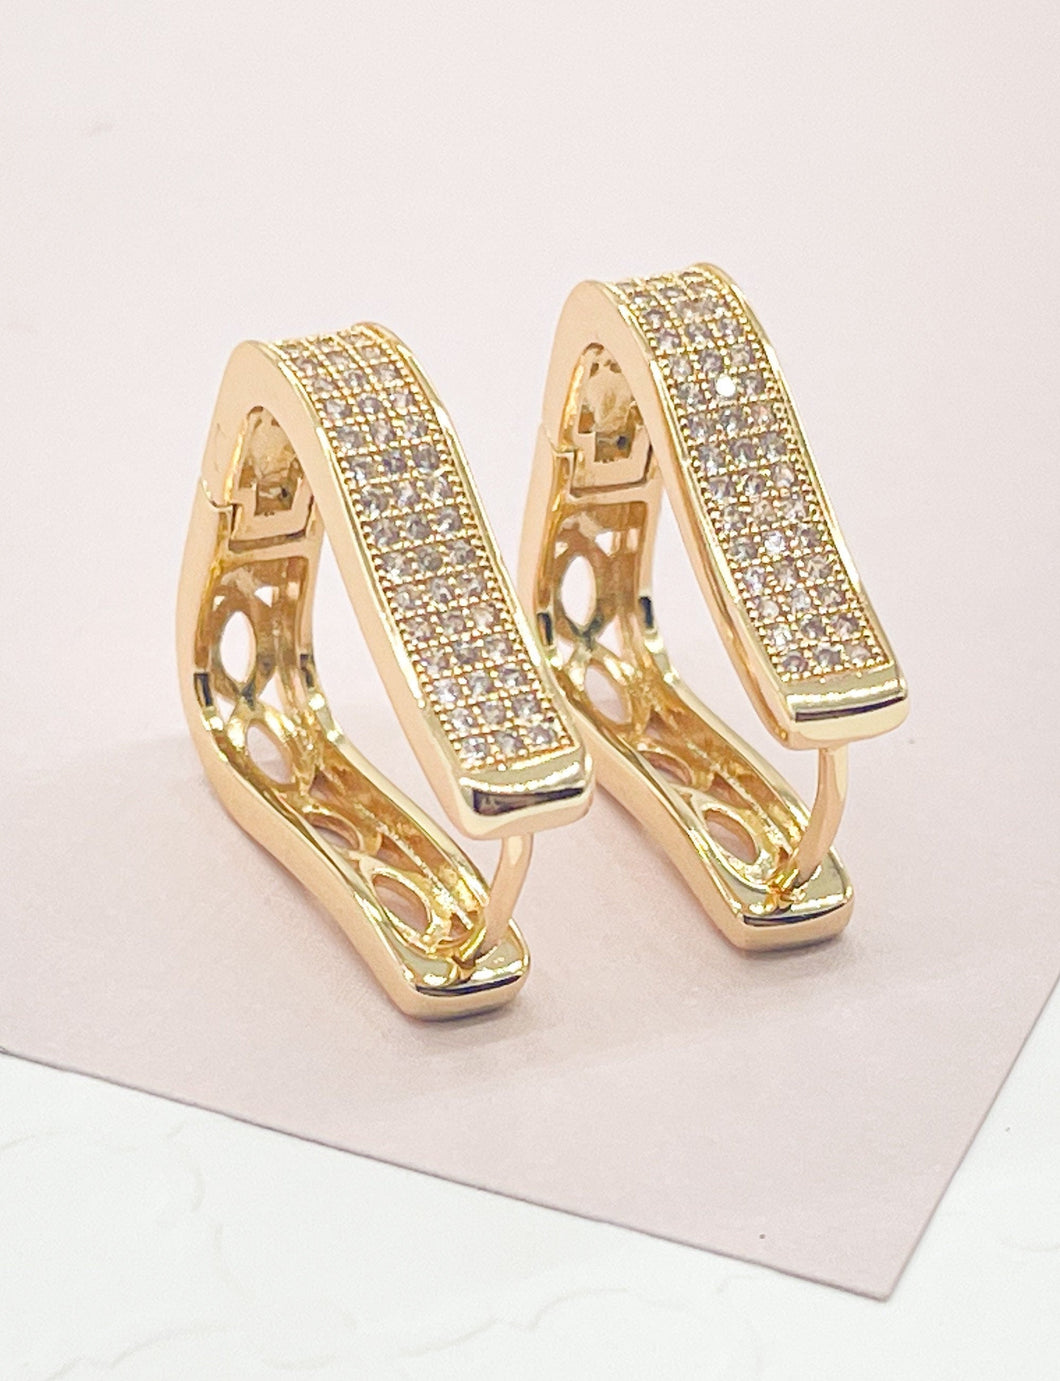 Luxury Jewelry, Sophisticate 18k Gold Filled Clicker Hoop Earrings Available in Rose Gold, Sivler And Gold